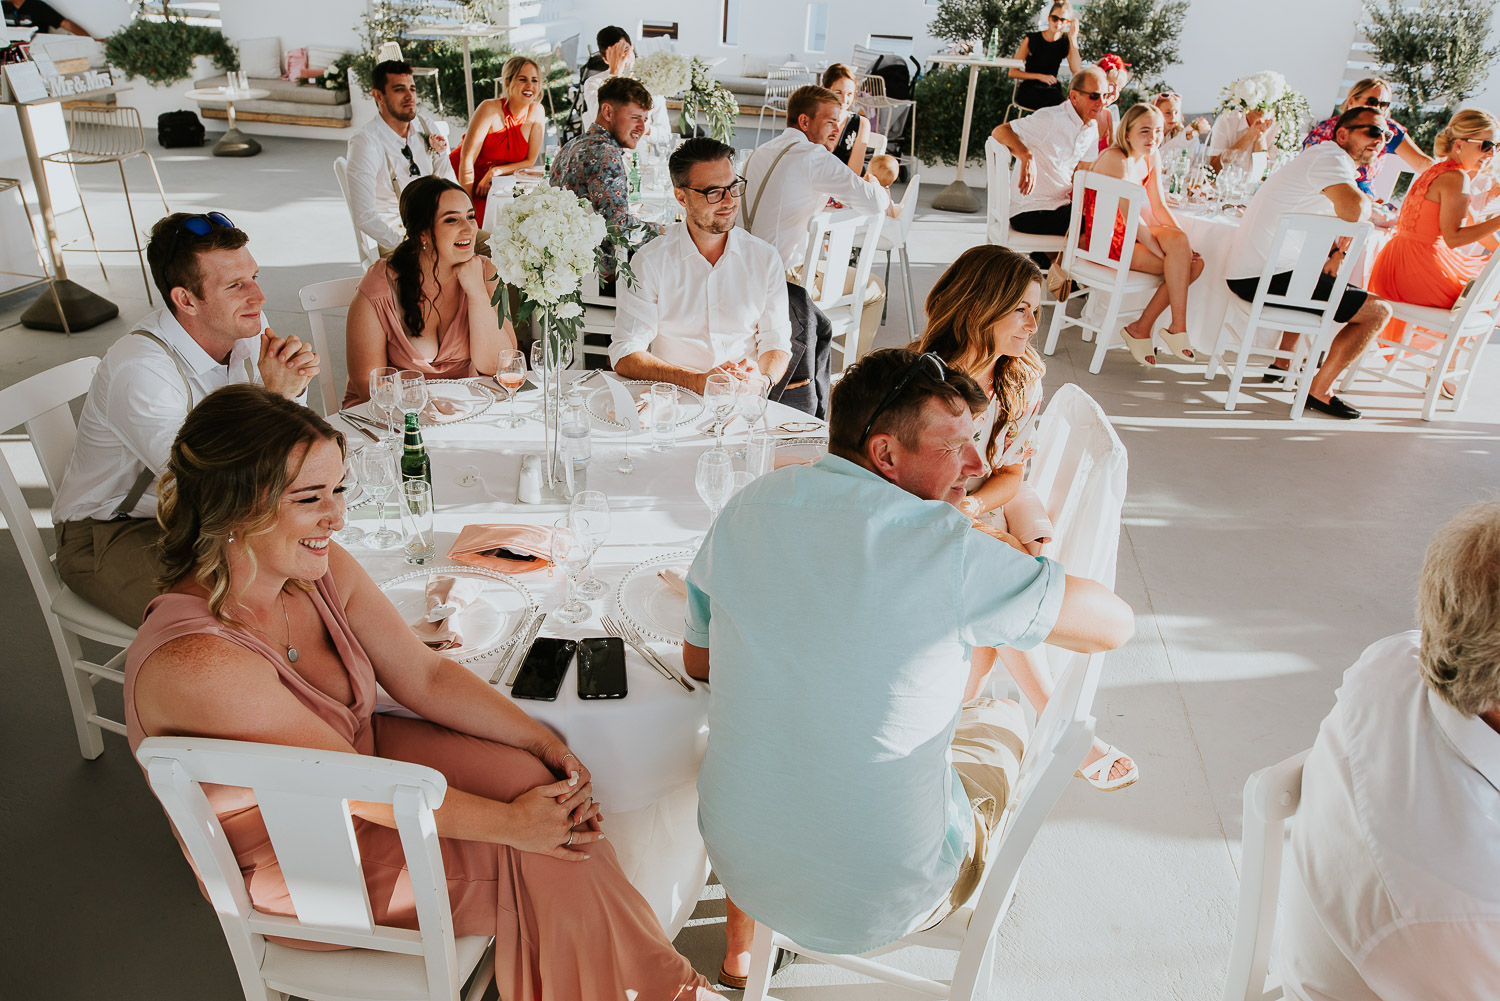 Wedding photographer Santorini: guests sat at their table laughing  as they listen to the speeches by Ben and Vesna.